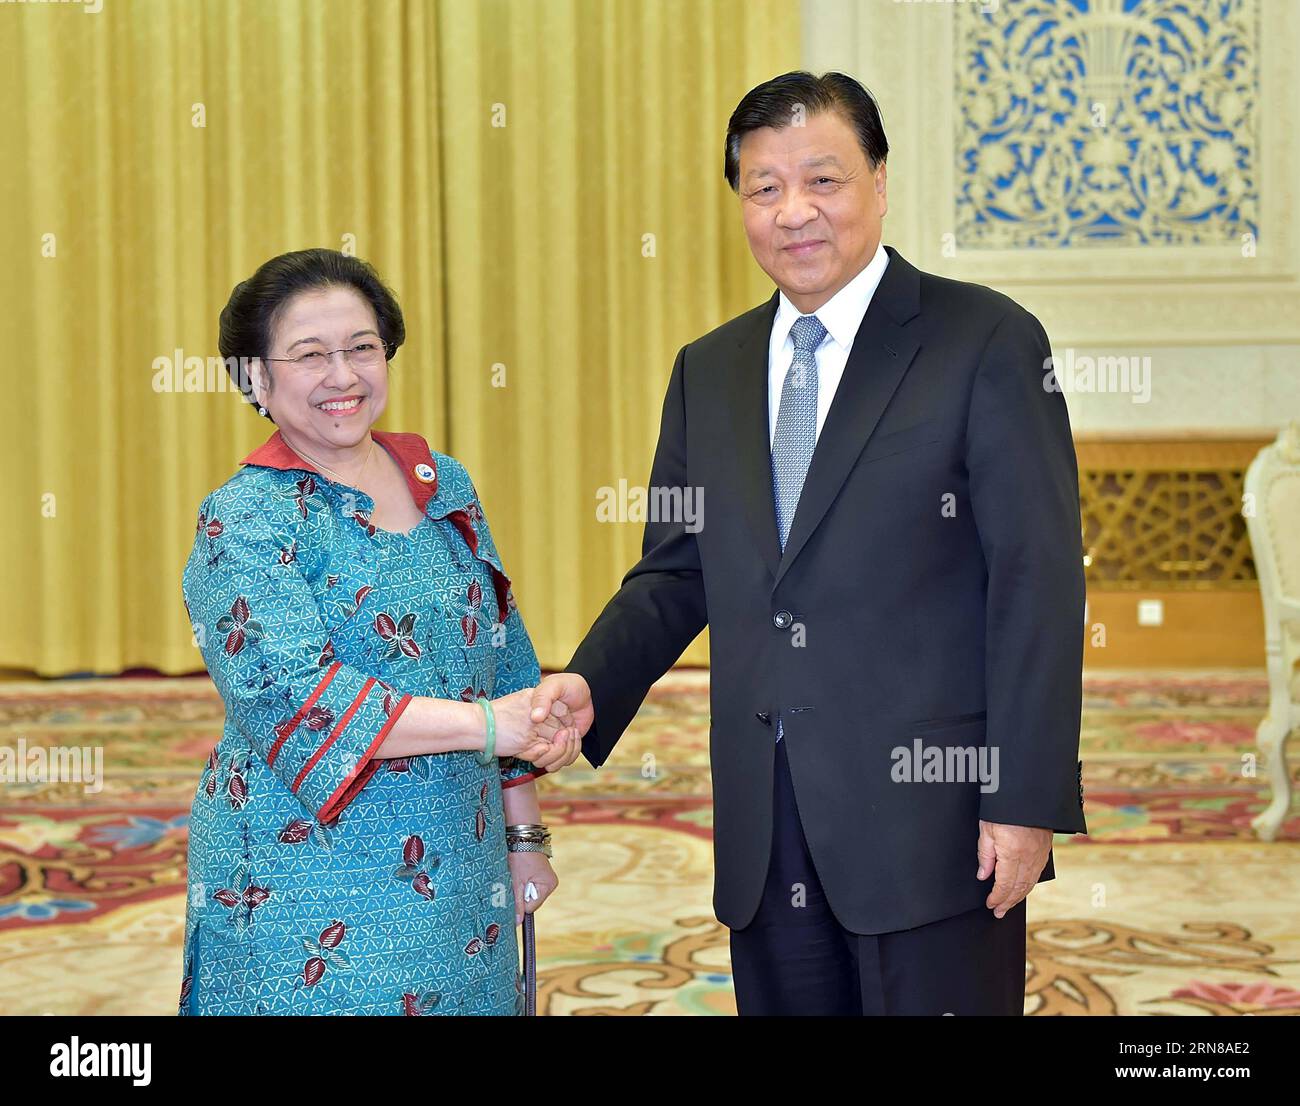 (151014) -- BEIJING, Oct. 14, 2015 -- Liu Yunshan (R), a member of the Standing Committee of the Political Bureau of the Communist Party of China (CPC) Central Committee, meets with former Indonesian President Megawati Soekarnoputri in Beijing, capital of China, Oct. 14, 2015. ) (yxb) CHINA-BEIJING-LIU YUNSHAN-INDONESIA-MEETING (CN) LixTao PUBLICATIONxNOTxINxCHN   151014 Beijing OCT 14 2015 Liu Yunshan r a member of The thing Committee of The Political Bureau of The Communist Party of China CPC Central Committee Meets With Former Indonesian President Megawati Soekarnoputri in Beijing Capital o Stock Photo